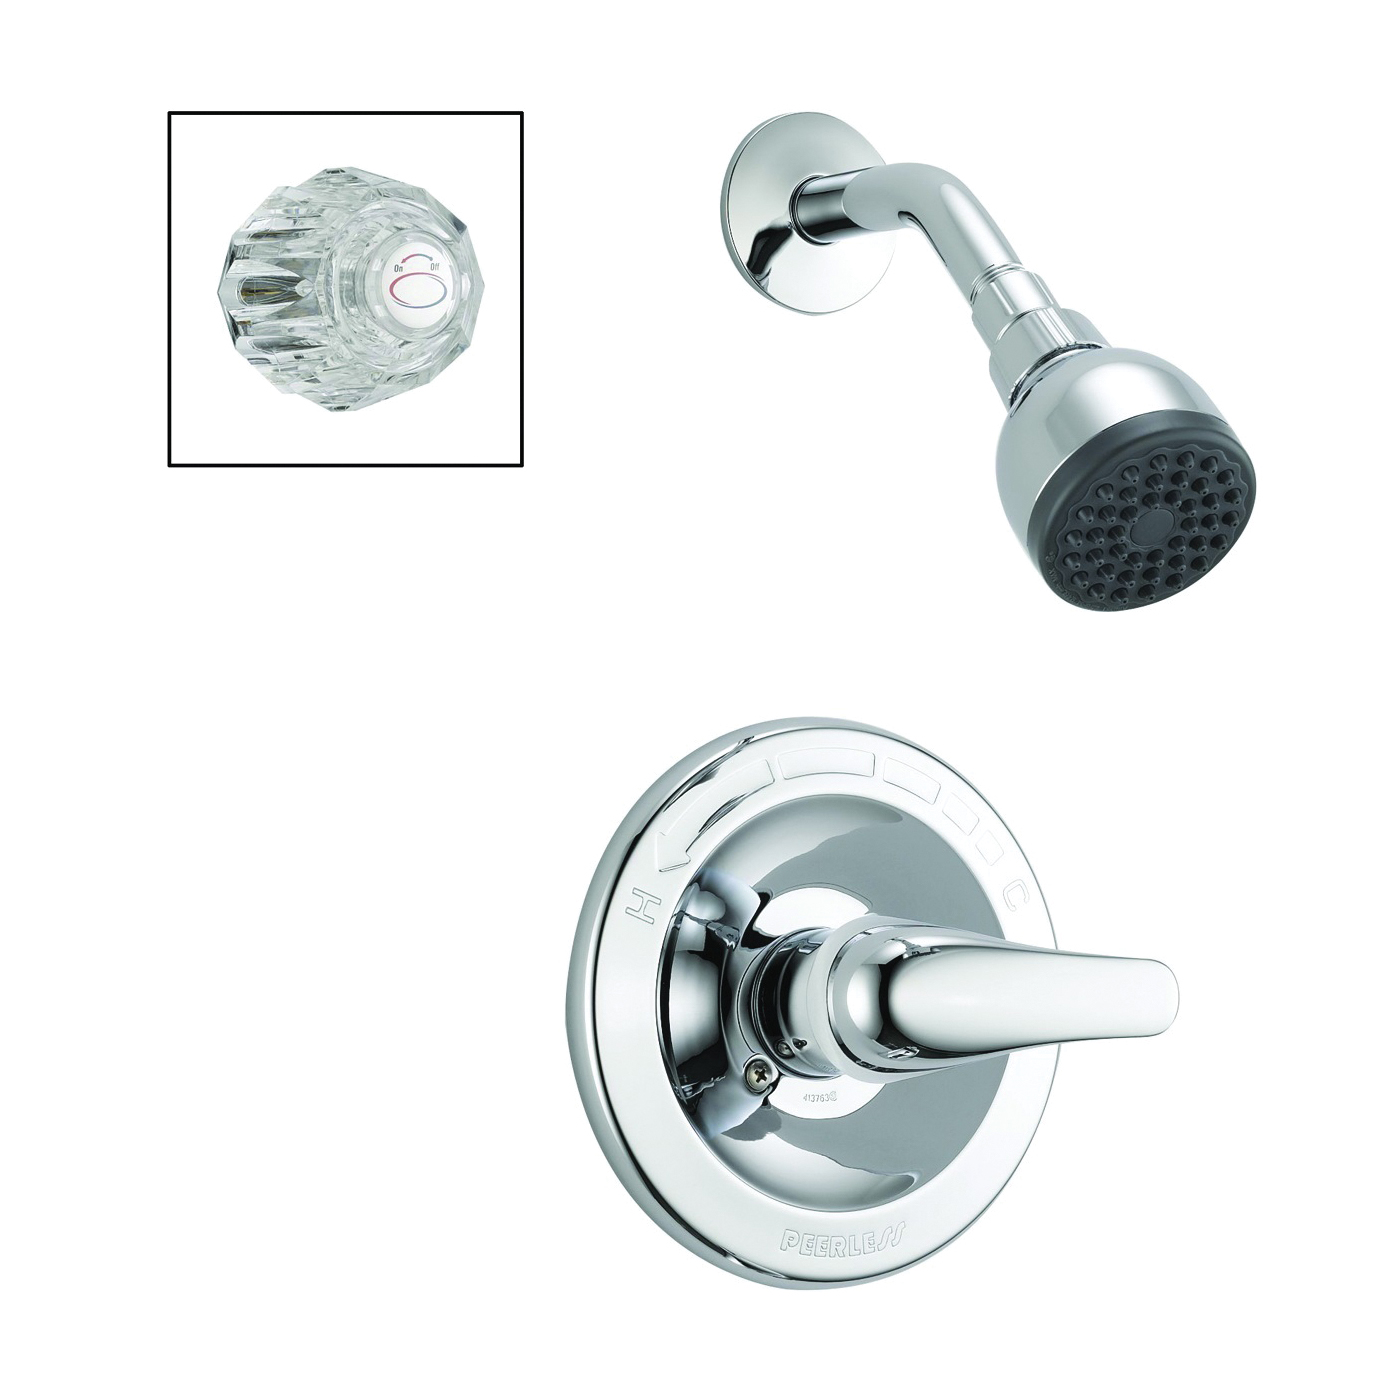 P188710 Shower Faucet, 1.75 gpm, Brass, Chrome Plated, Lever Handle, 1-Handle